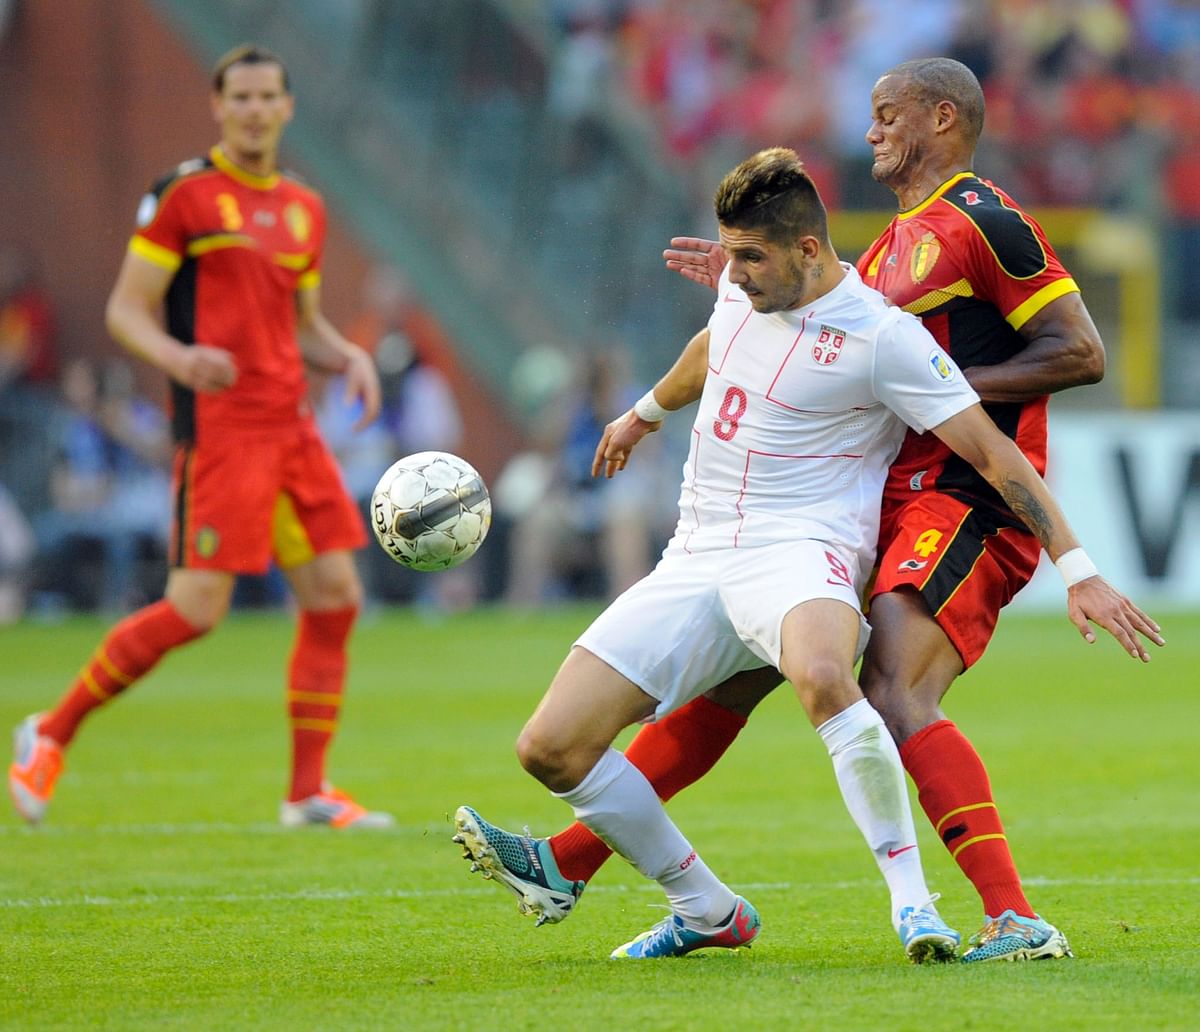 Serbia's forward Aleksandar Mitrovic (2nd L) and Belgium's defender Vincent Kompany (2nd R) vie for the ball during the 2014 World Cup qualifying football match between Belgium and Serbia at the King Baudouin stadium in Brussels on June 7, 2013. AFP